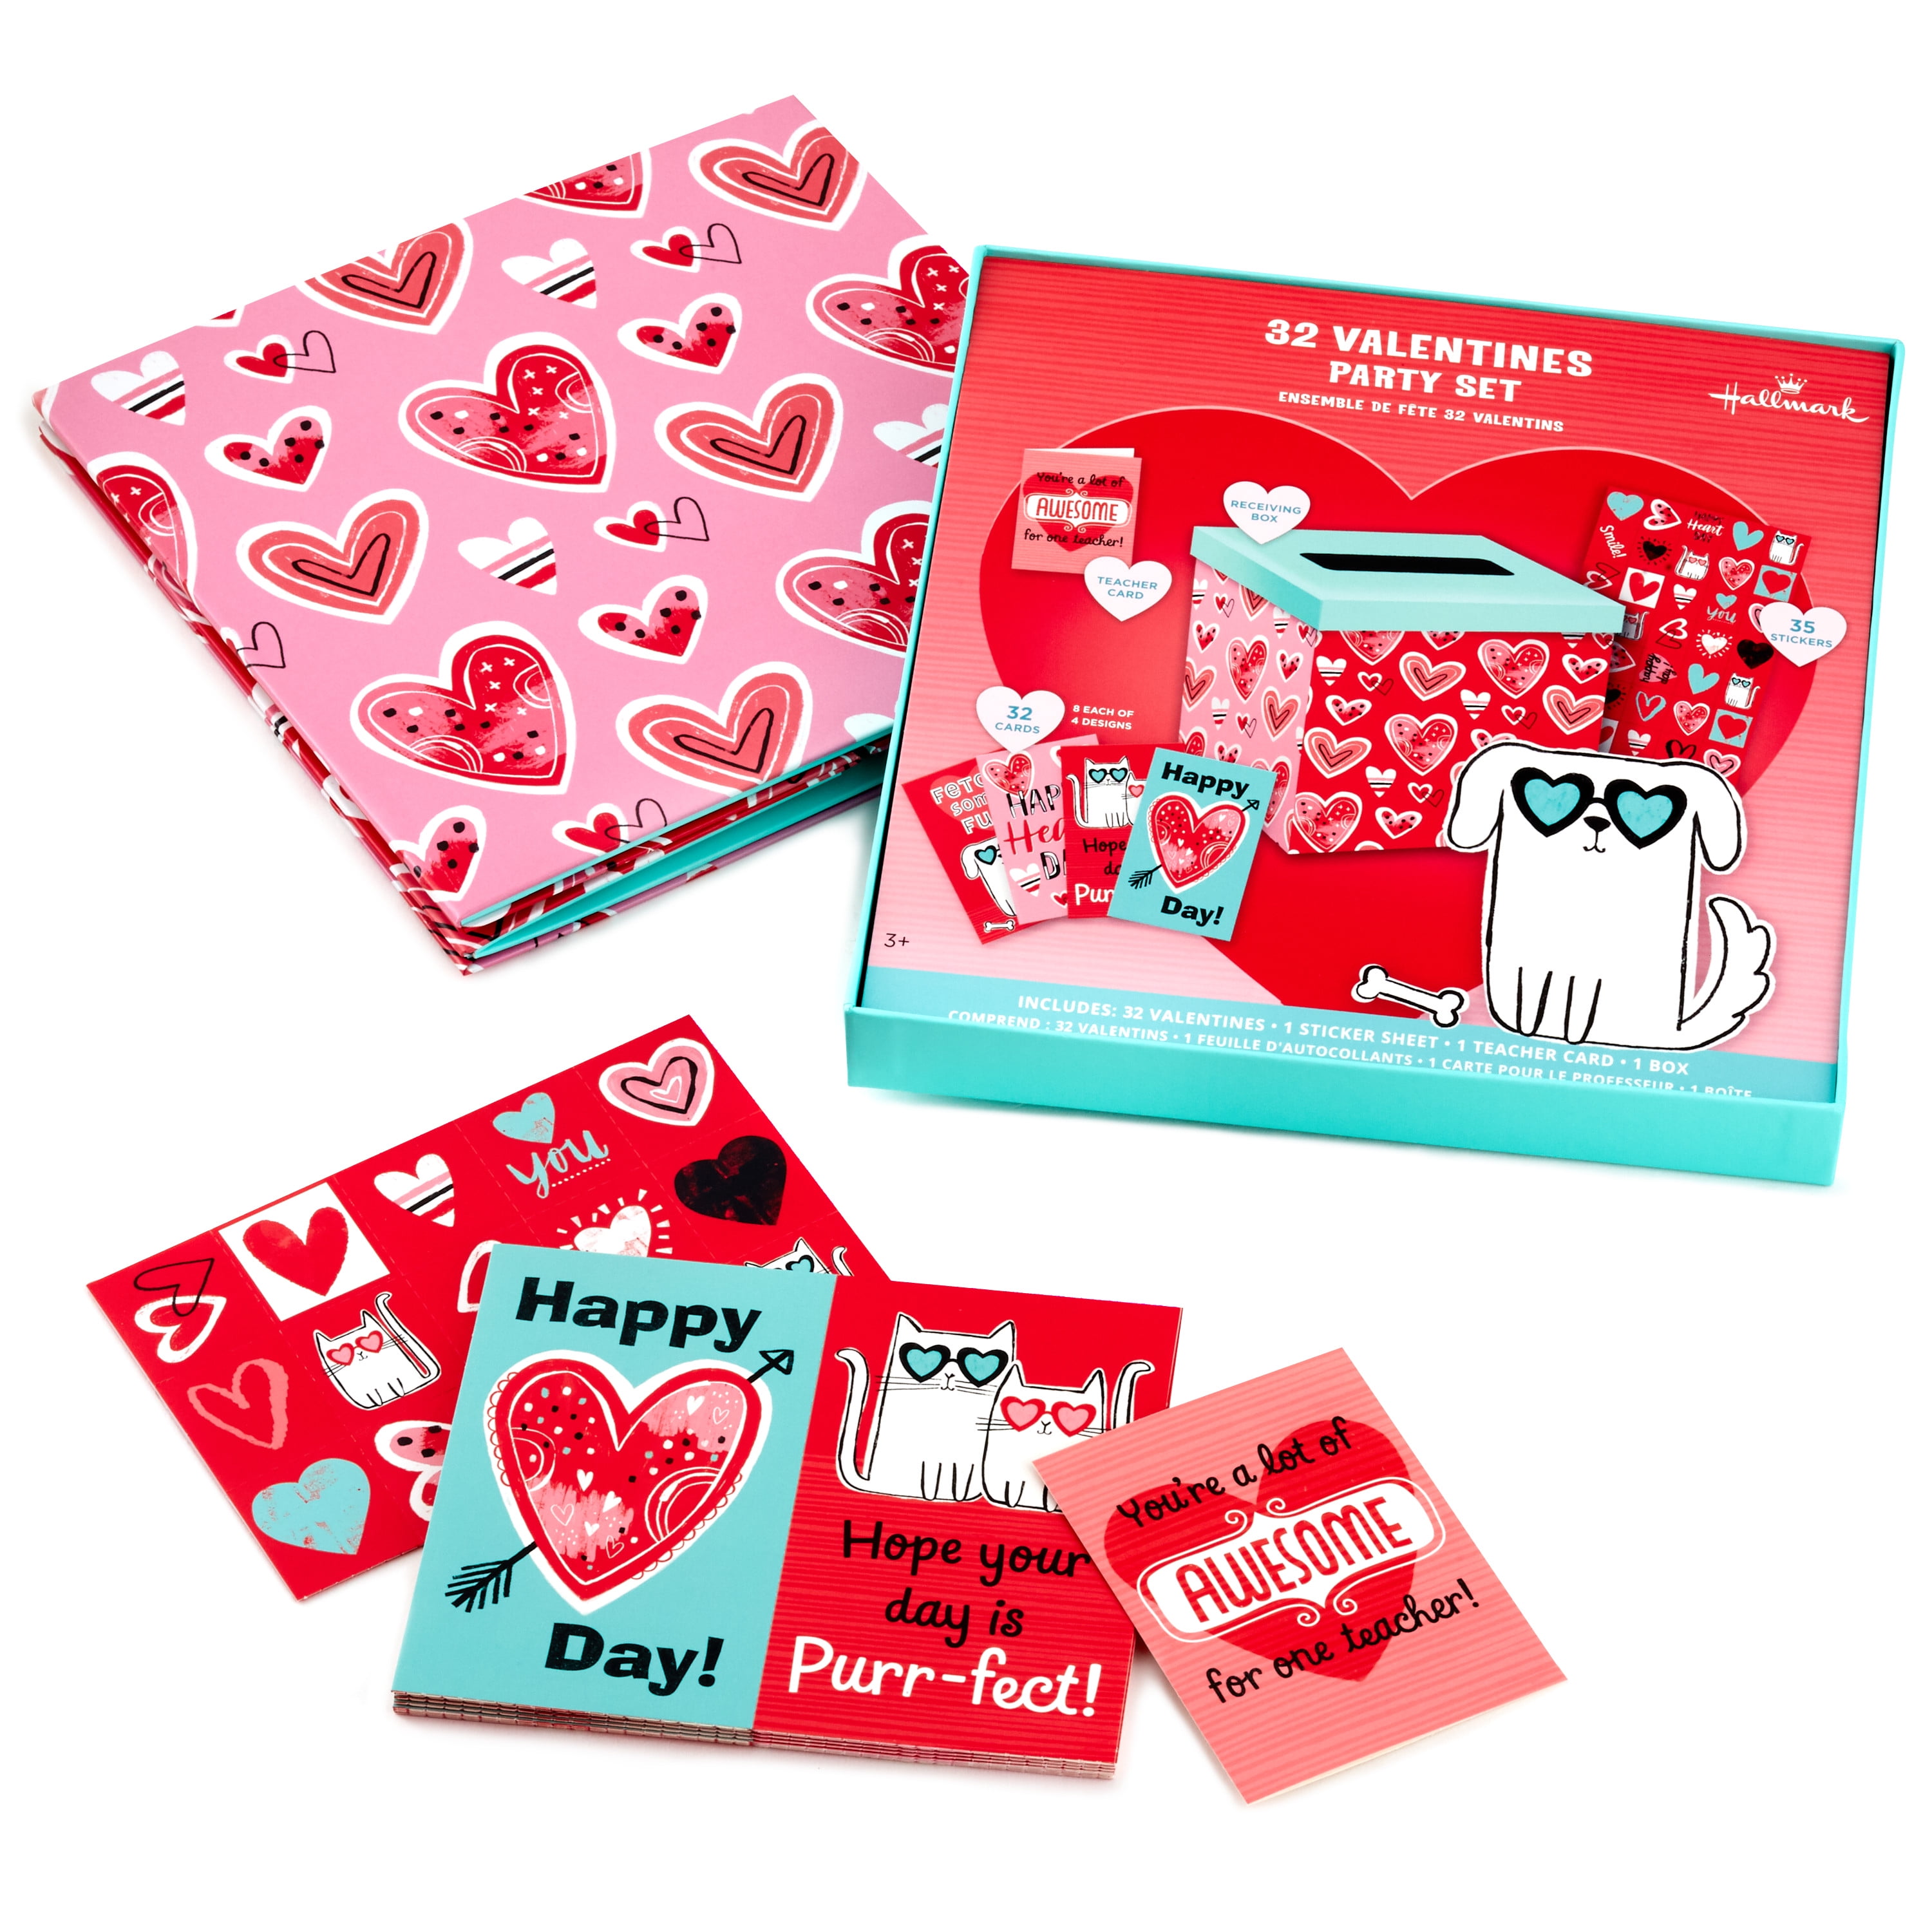 35+ Easy and Affordable Valentines Gifts from Teachers to Kids - HubPages